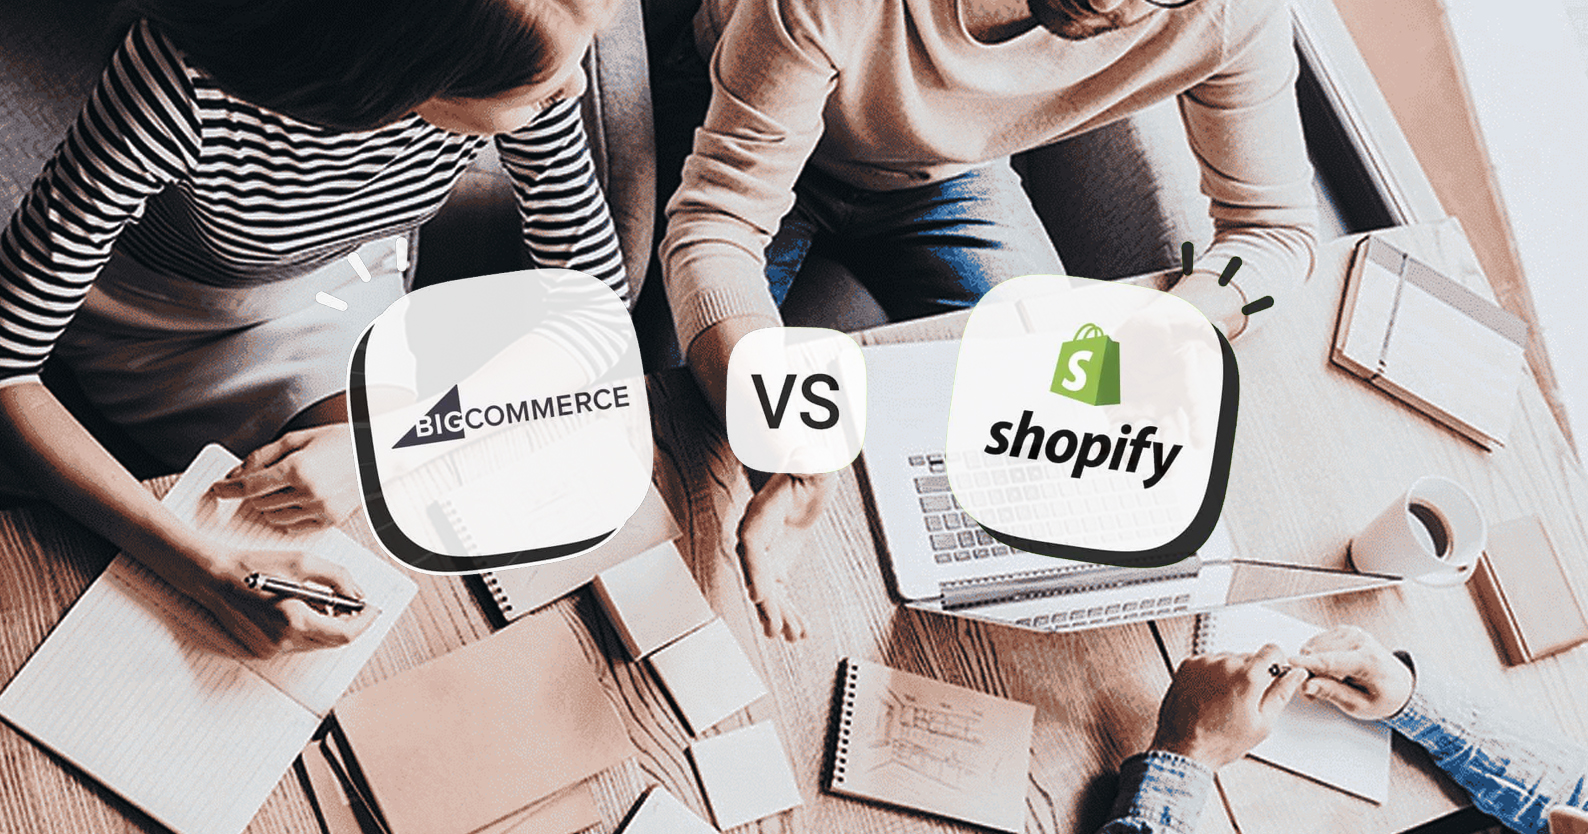 Blog - Making the Right Choice for Your Online Store: BigCommerce vs Shopify